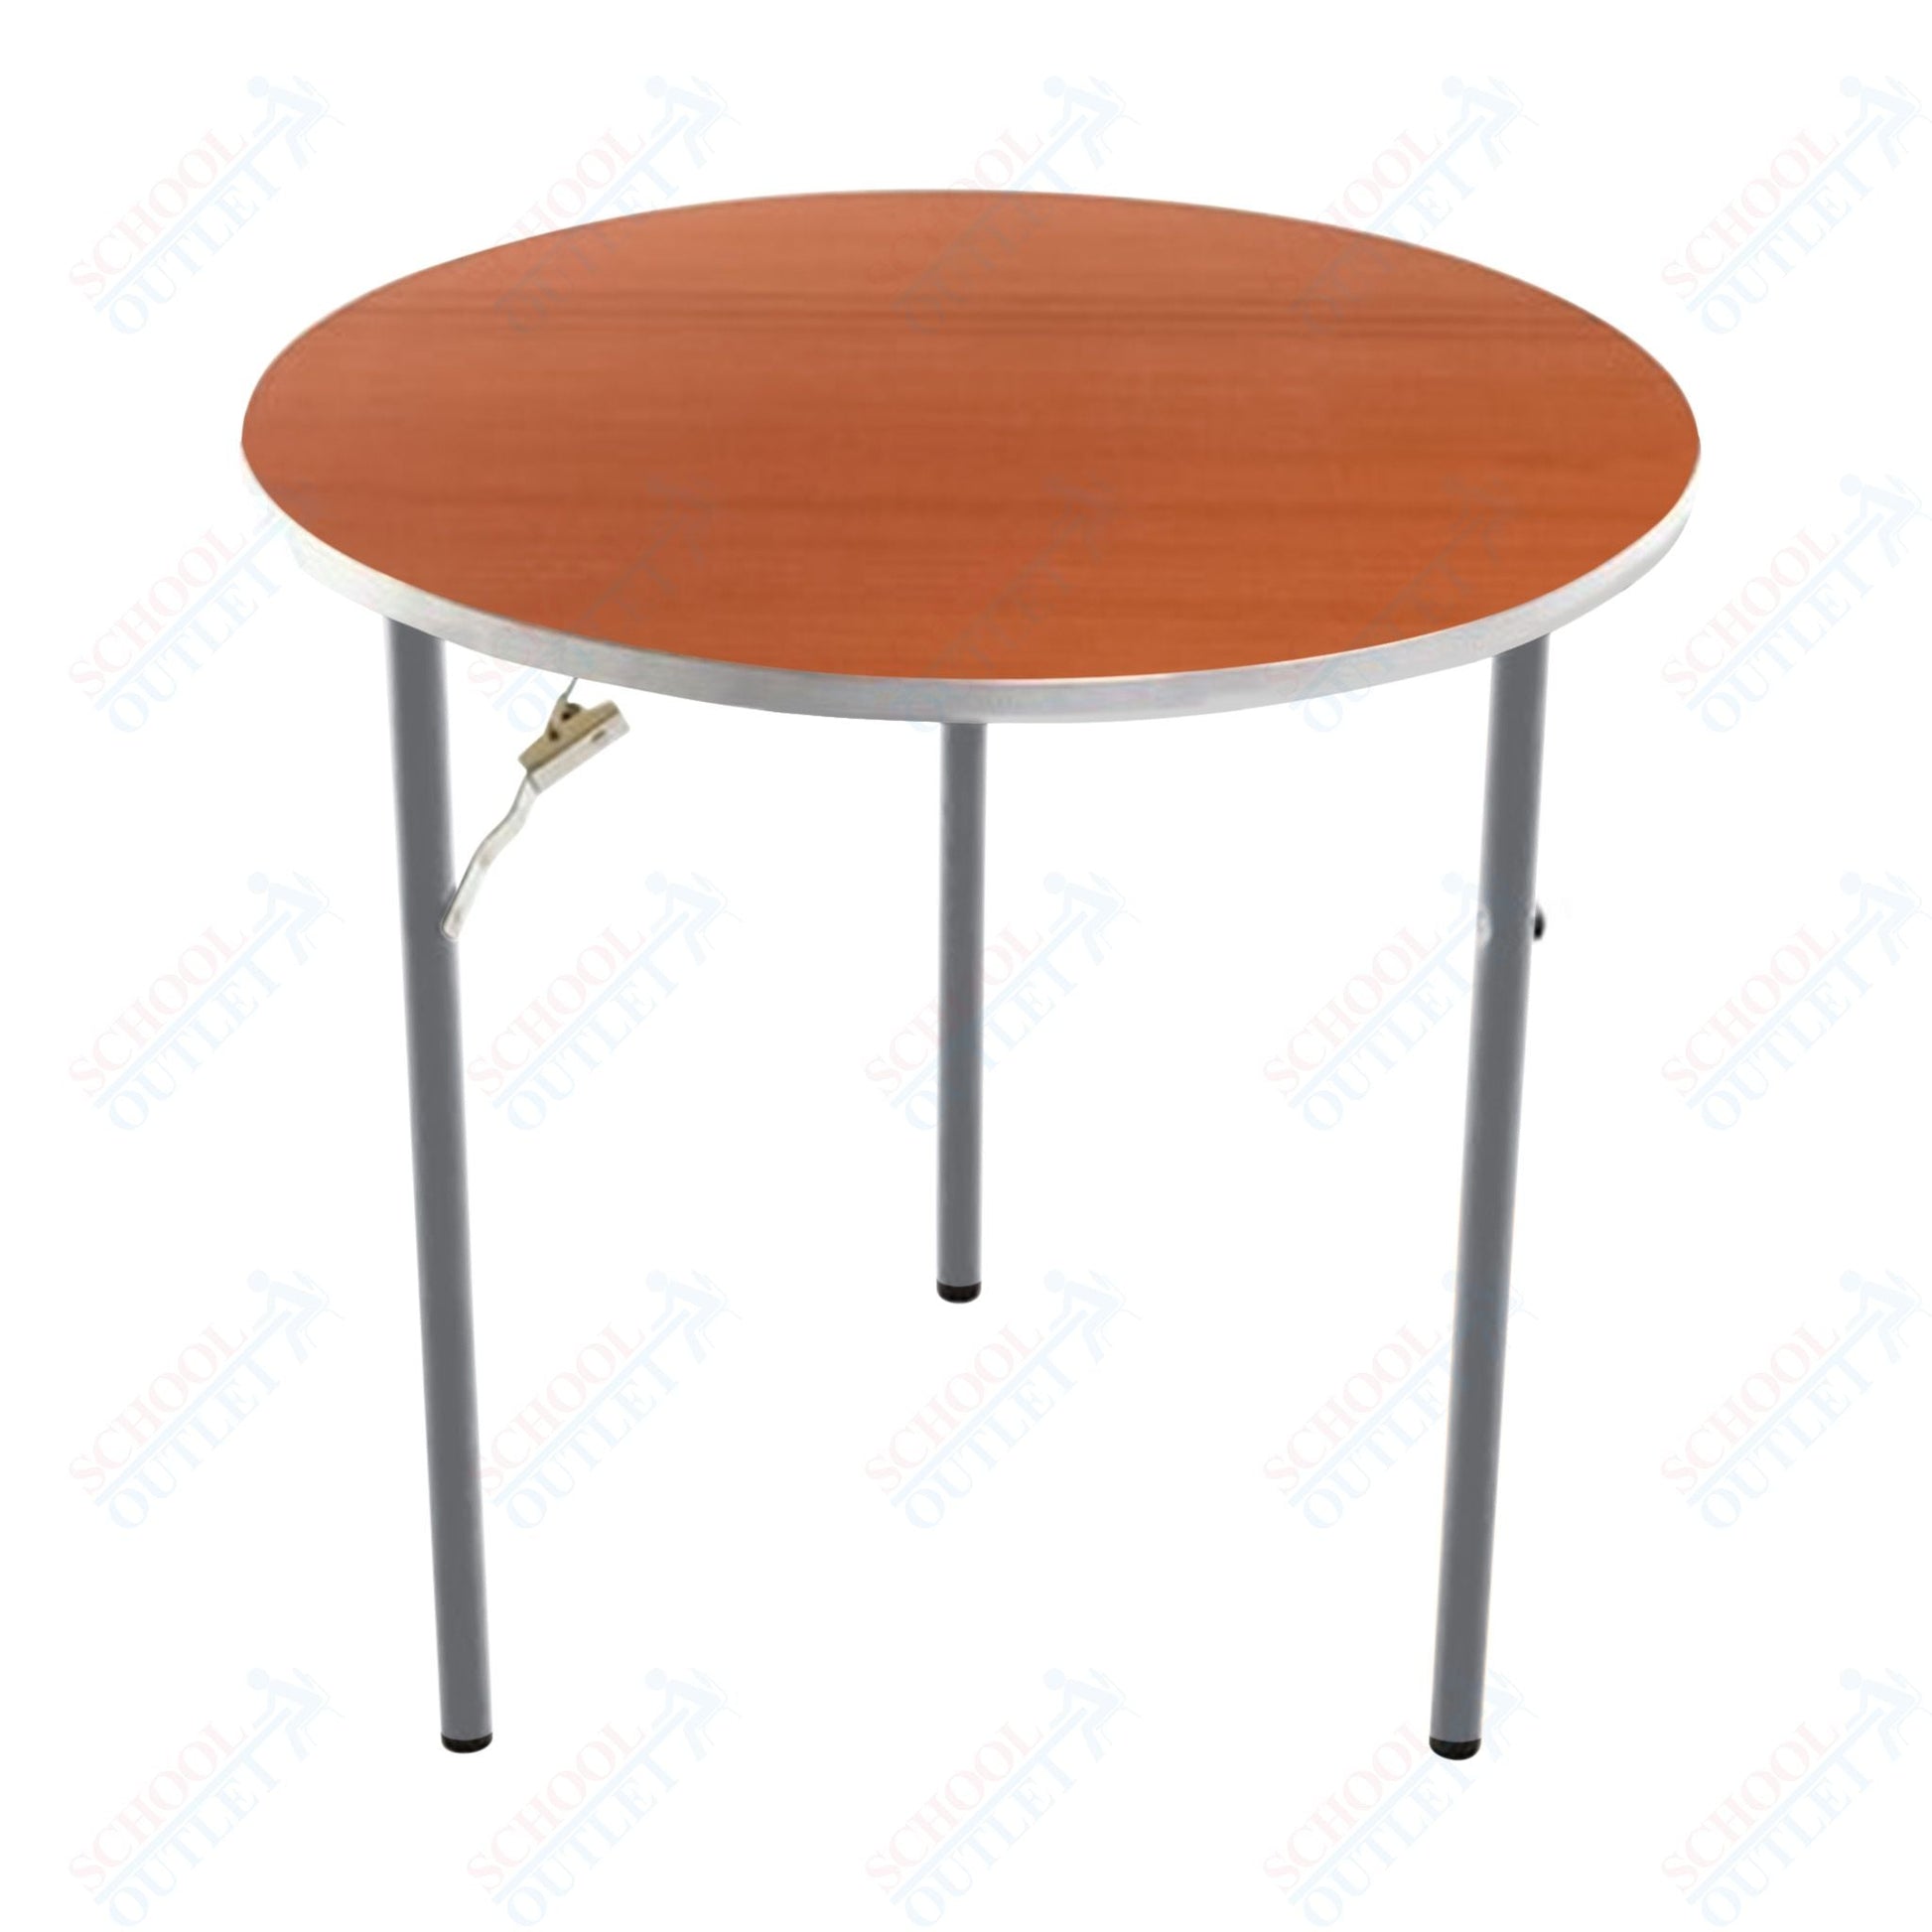 AmTab Folding Table - Plywood Stained and Sealed - Aluminum Edge - Round - 72" Diameter x 29"H (AmTab AMT - R72PA) - SchoolOutlet